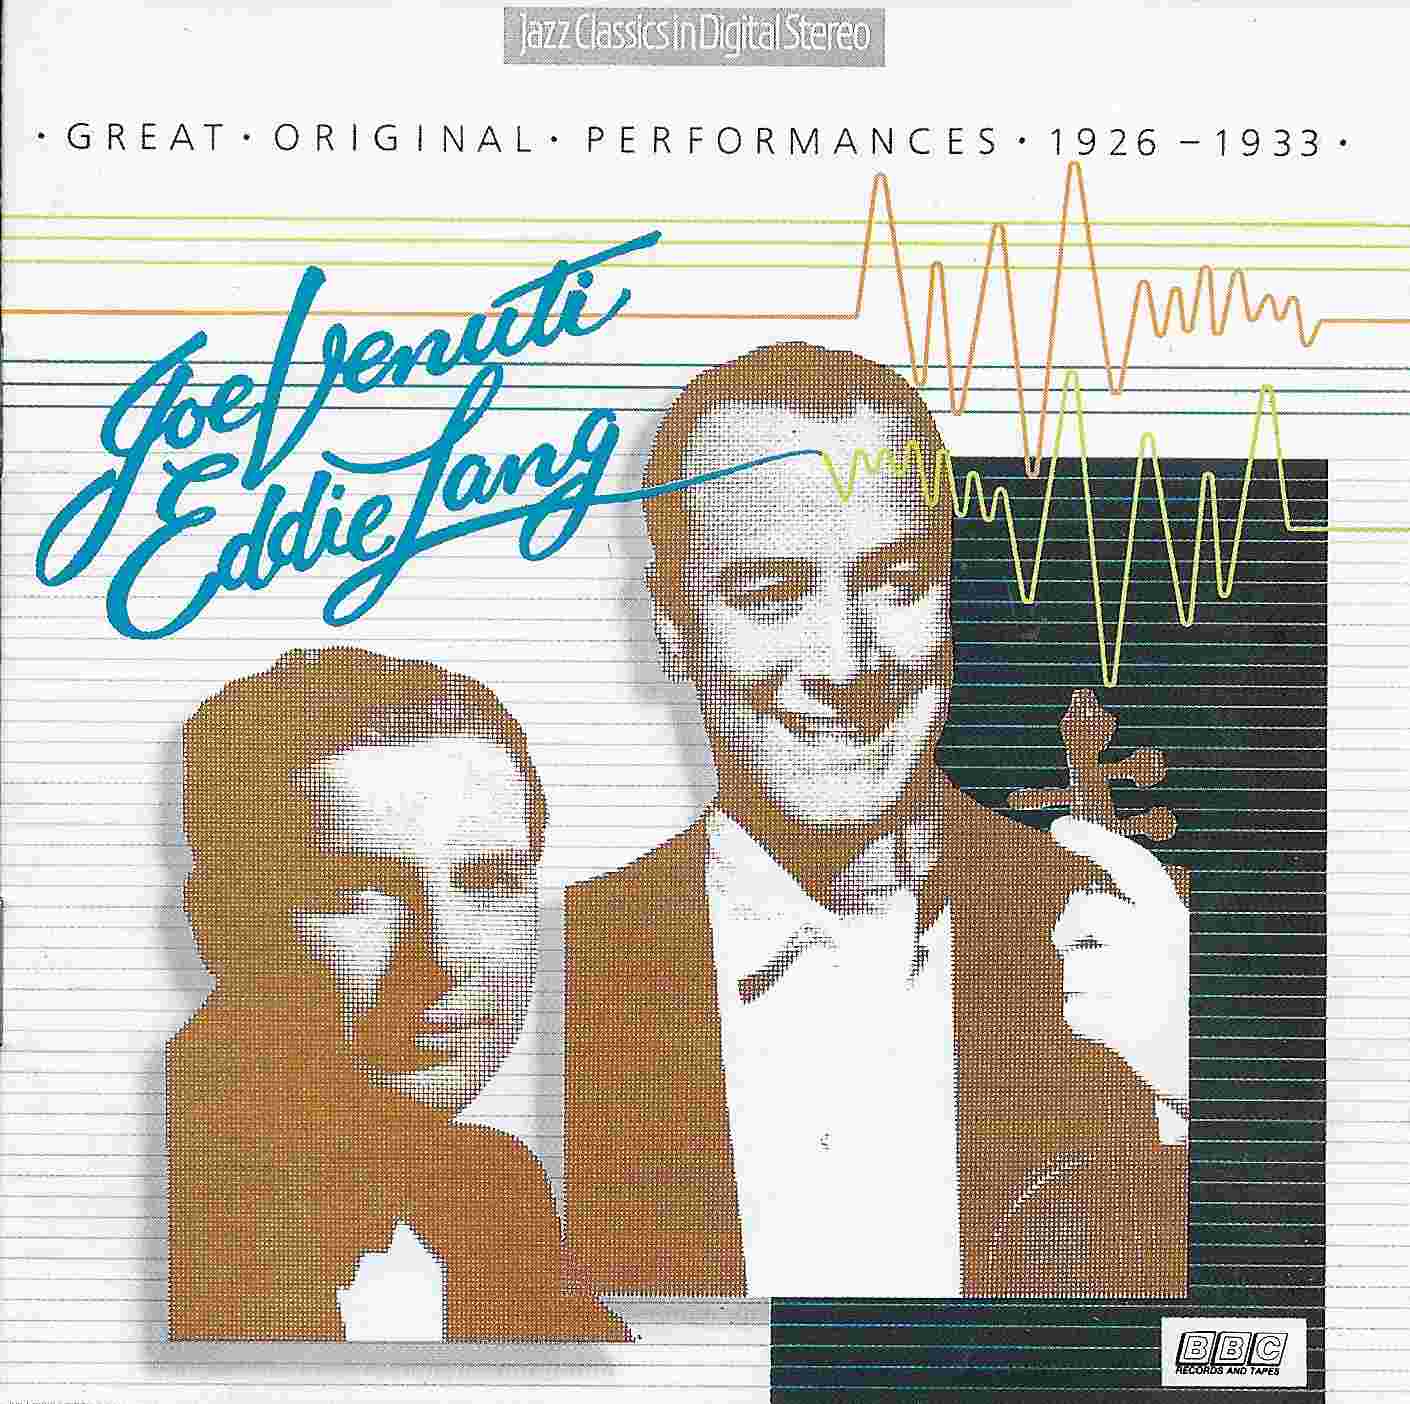 Picture of Jazz classics - Joe Venuti and Eddie Lang by artist Joe Venuti / Eddie Lang from the BBC cds - Records and Tapes library